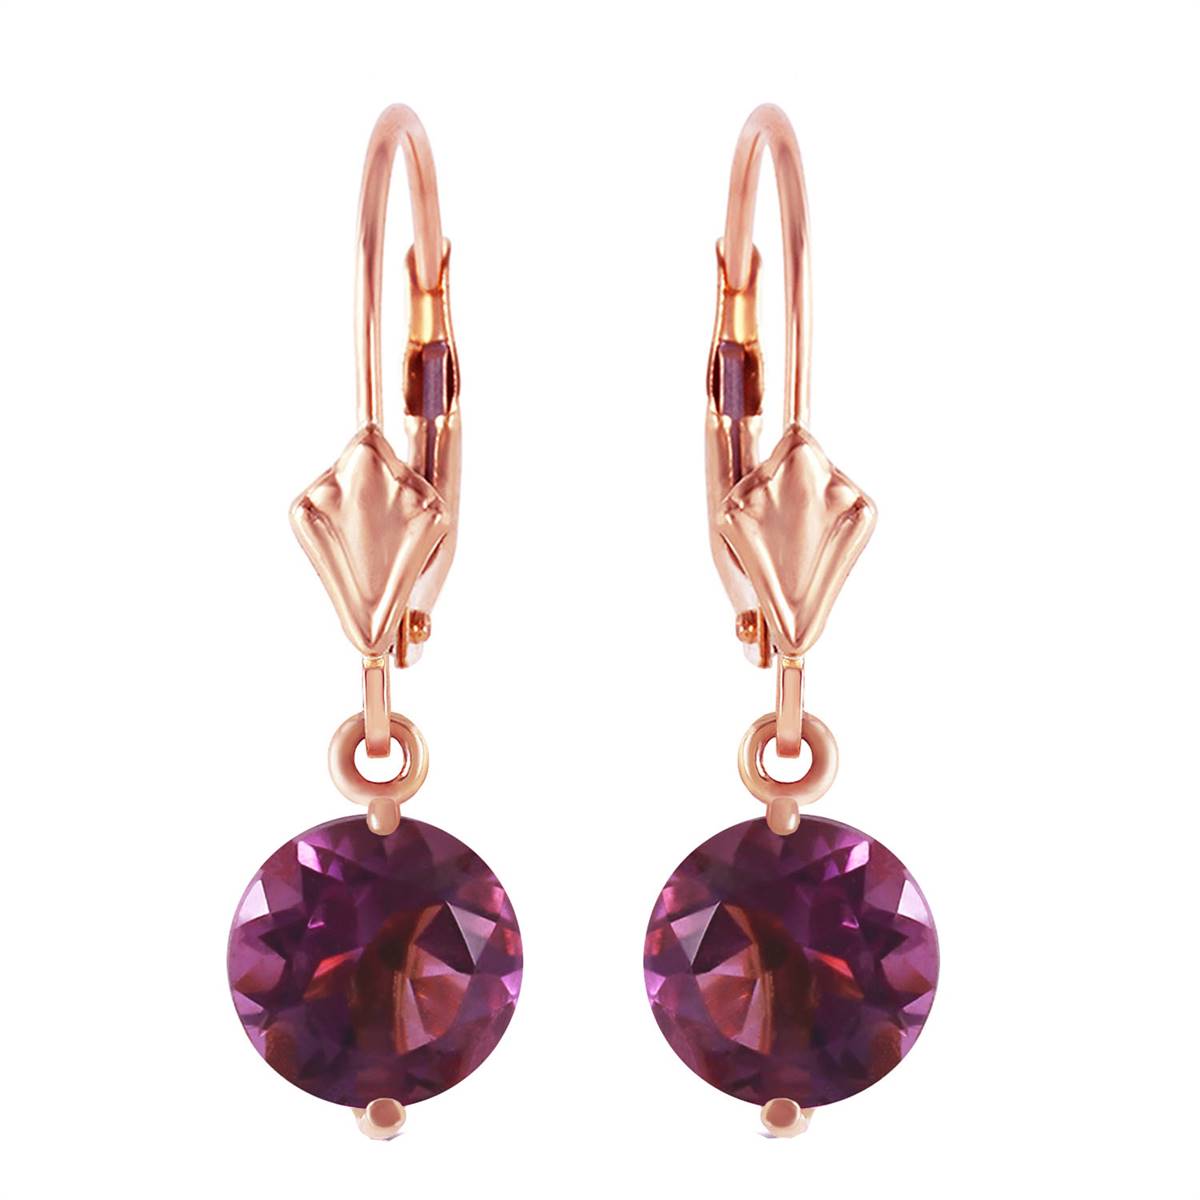 3.1 Carat 14K Solid Rose Gold Round Amethyst Leverback Earrings